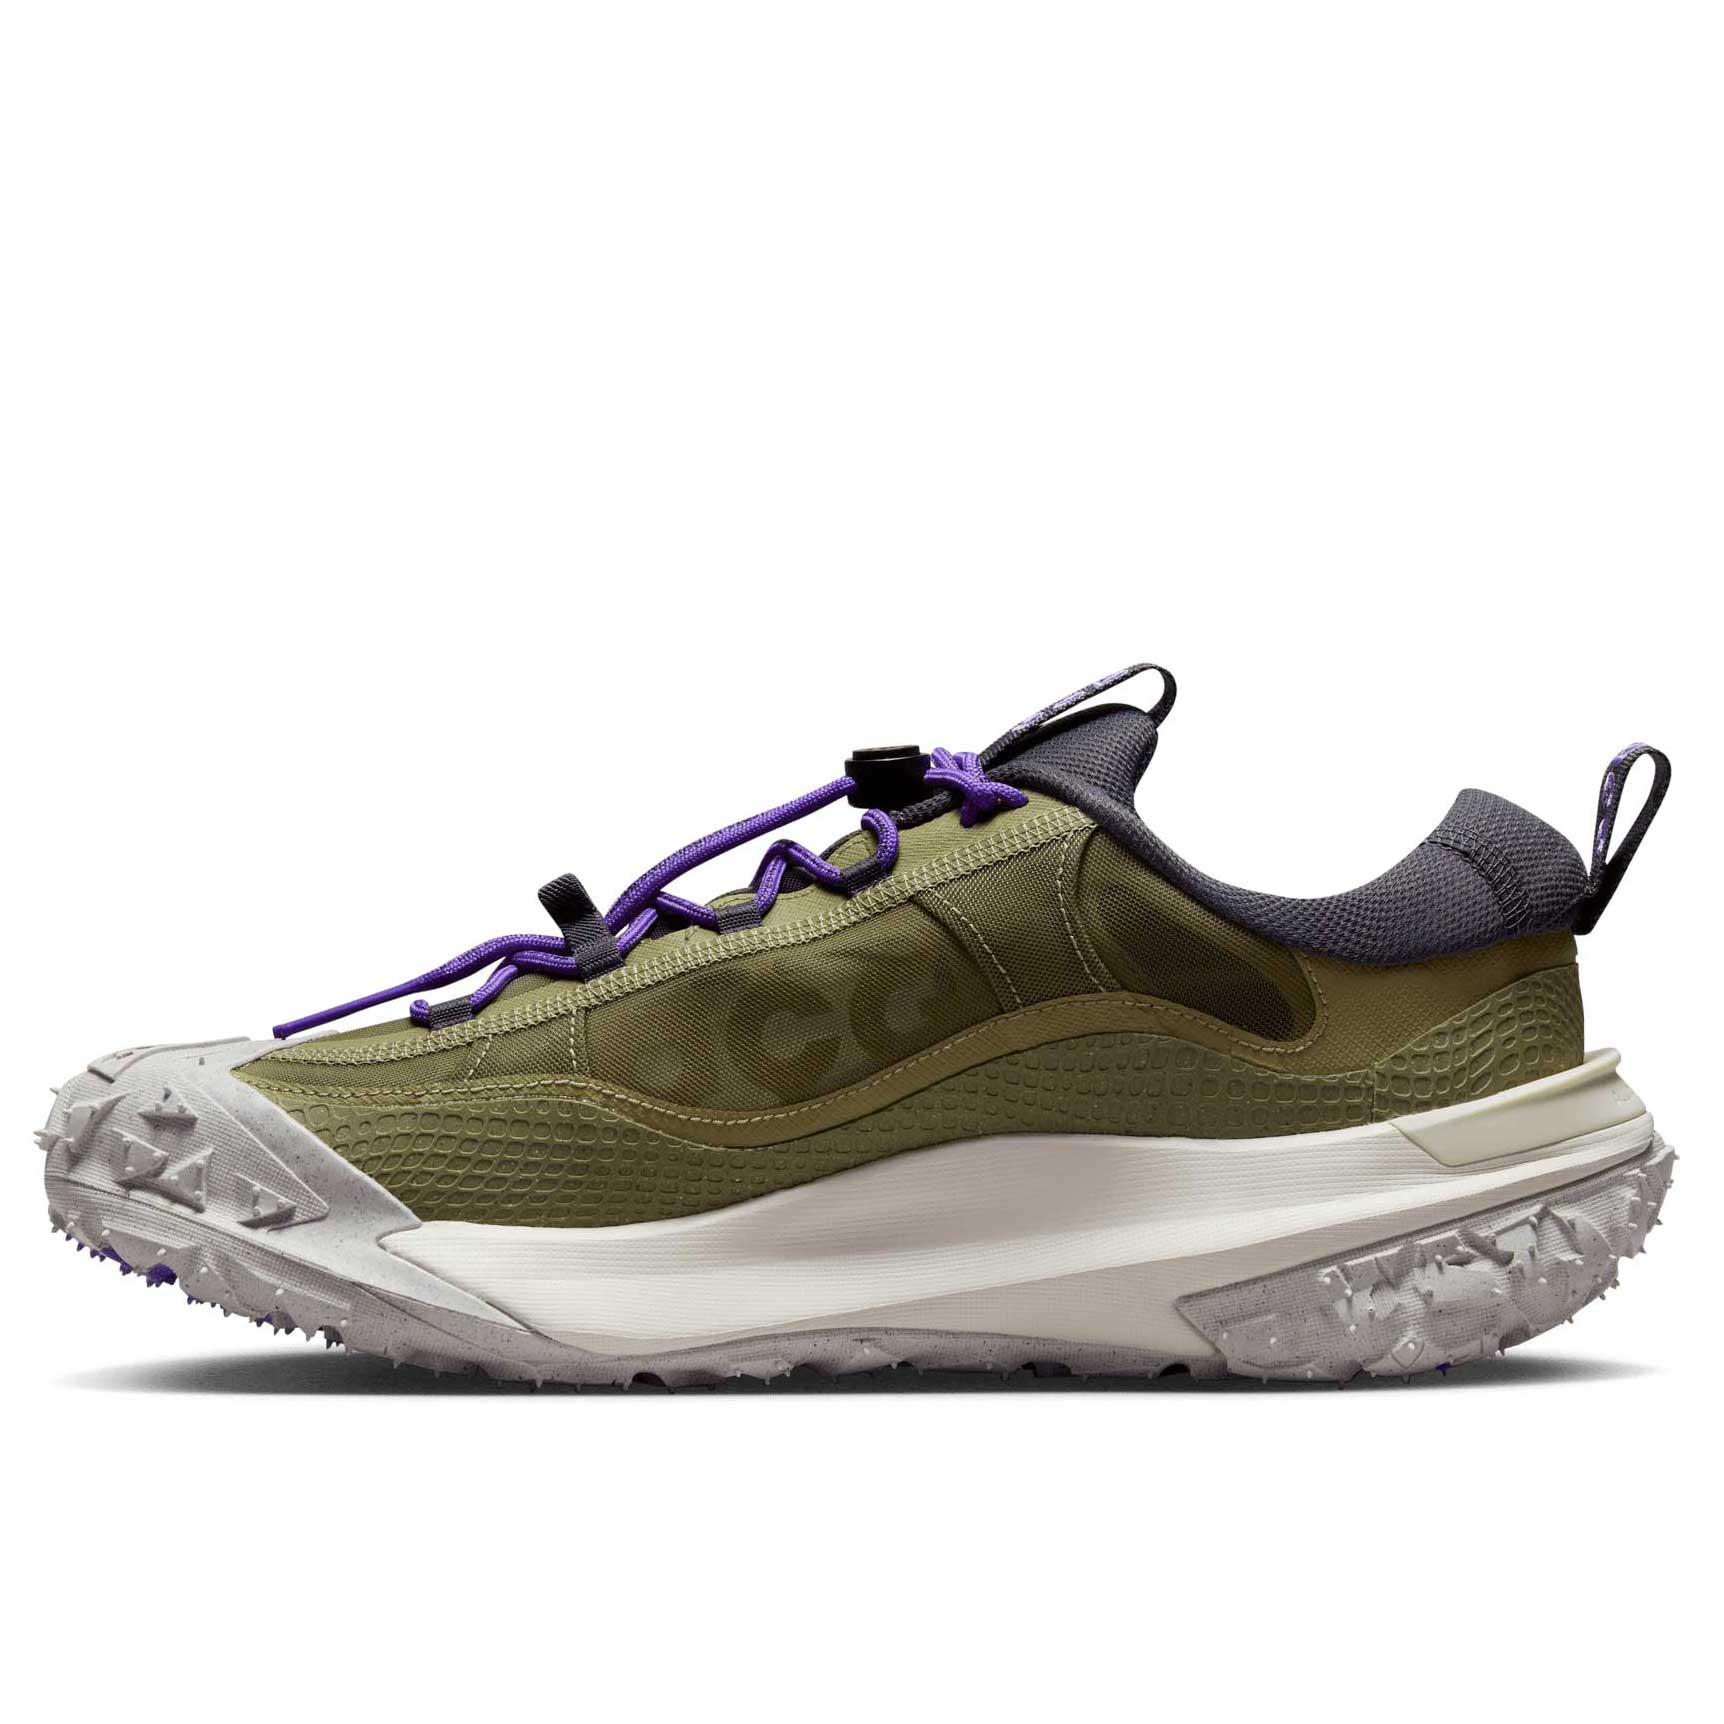 Nike Mens ACG MOUNTAIN FLY 2 LOW NEUTRAL OLIVE - Paragon Sports